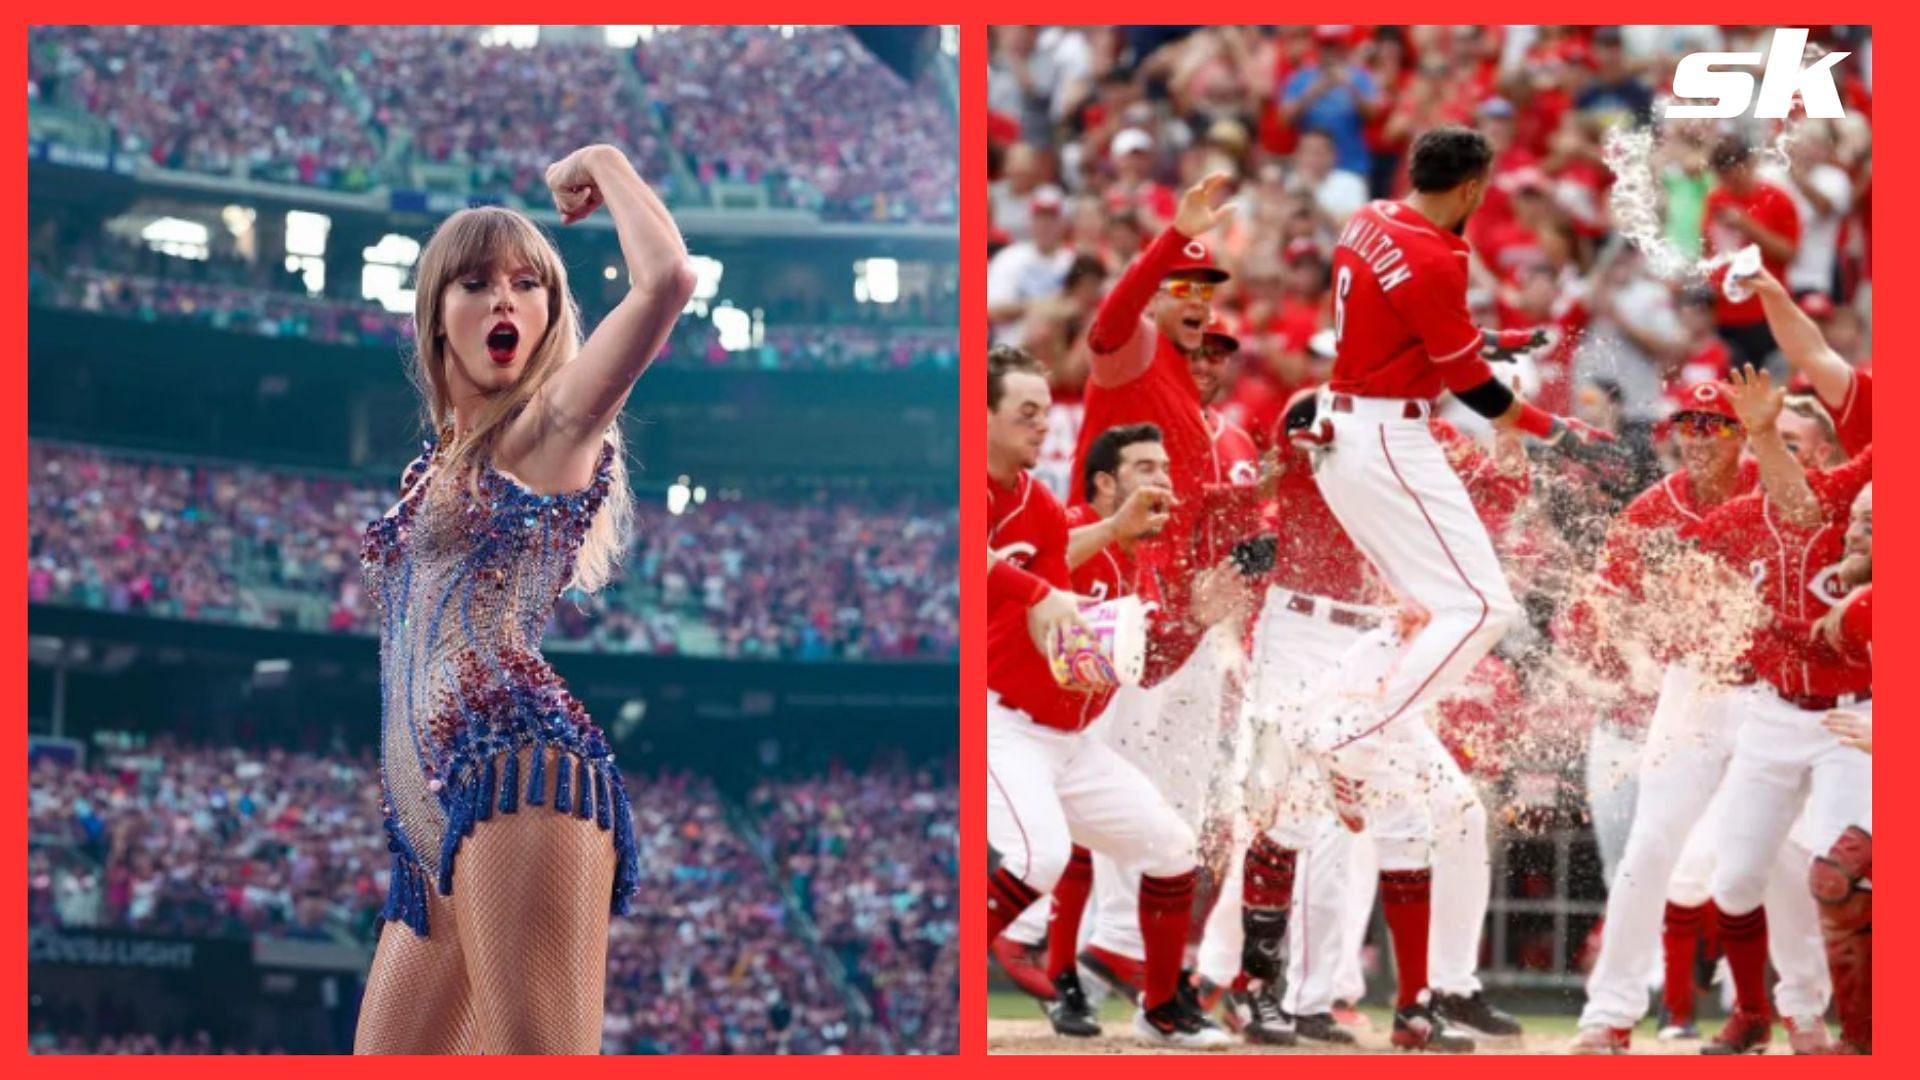 Unexpected fireworks disrupt Taylor Swift concert as Cincinnati Reds celebrate victory